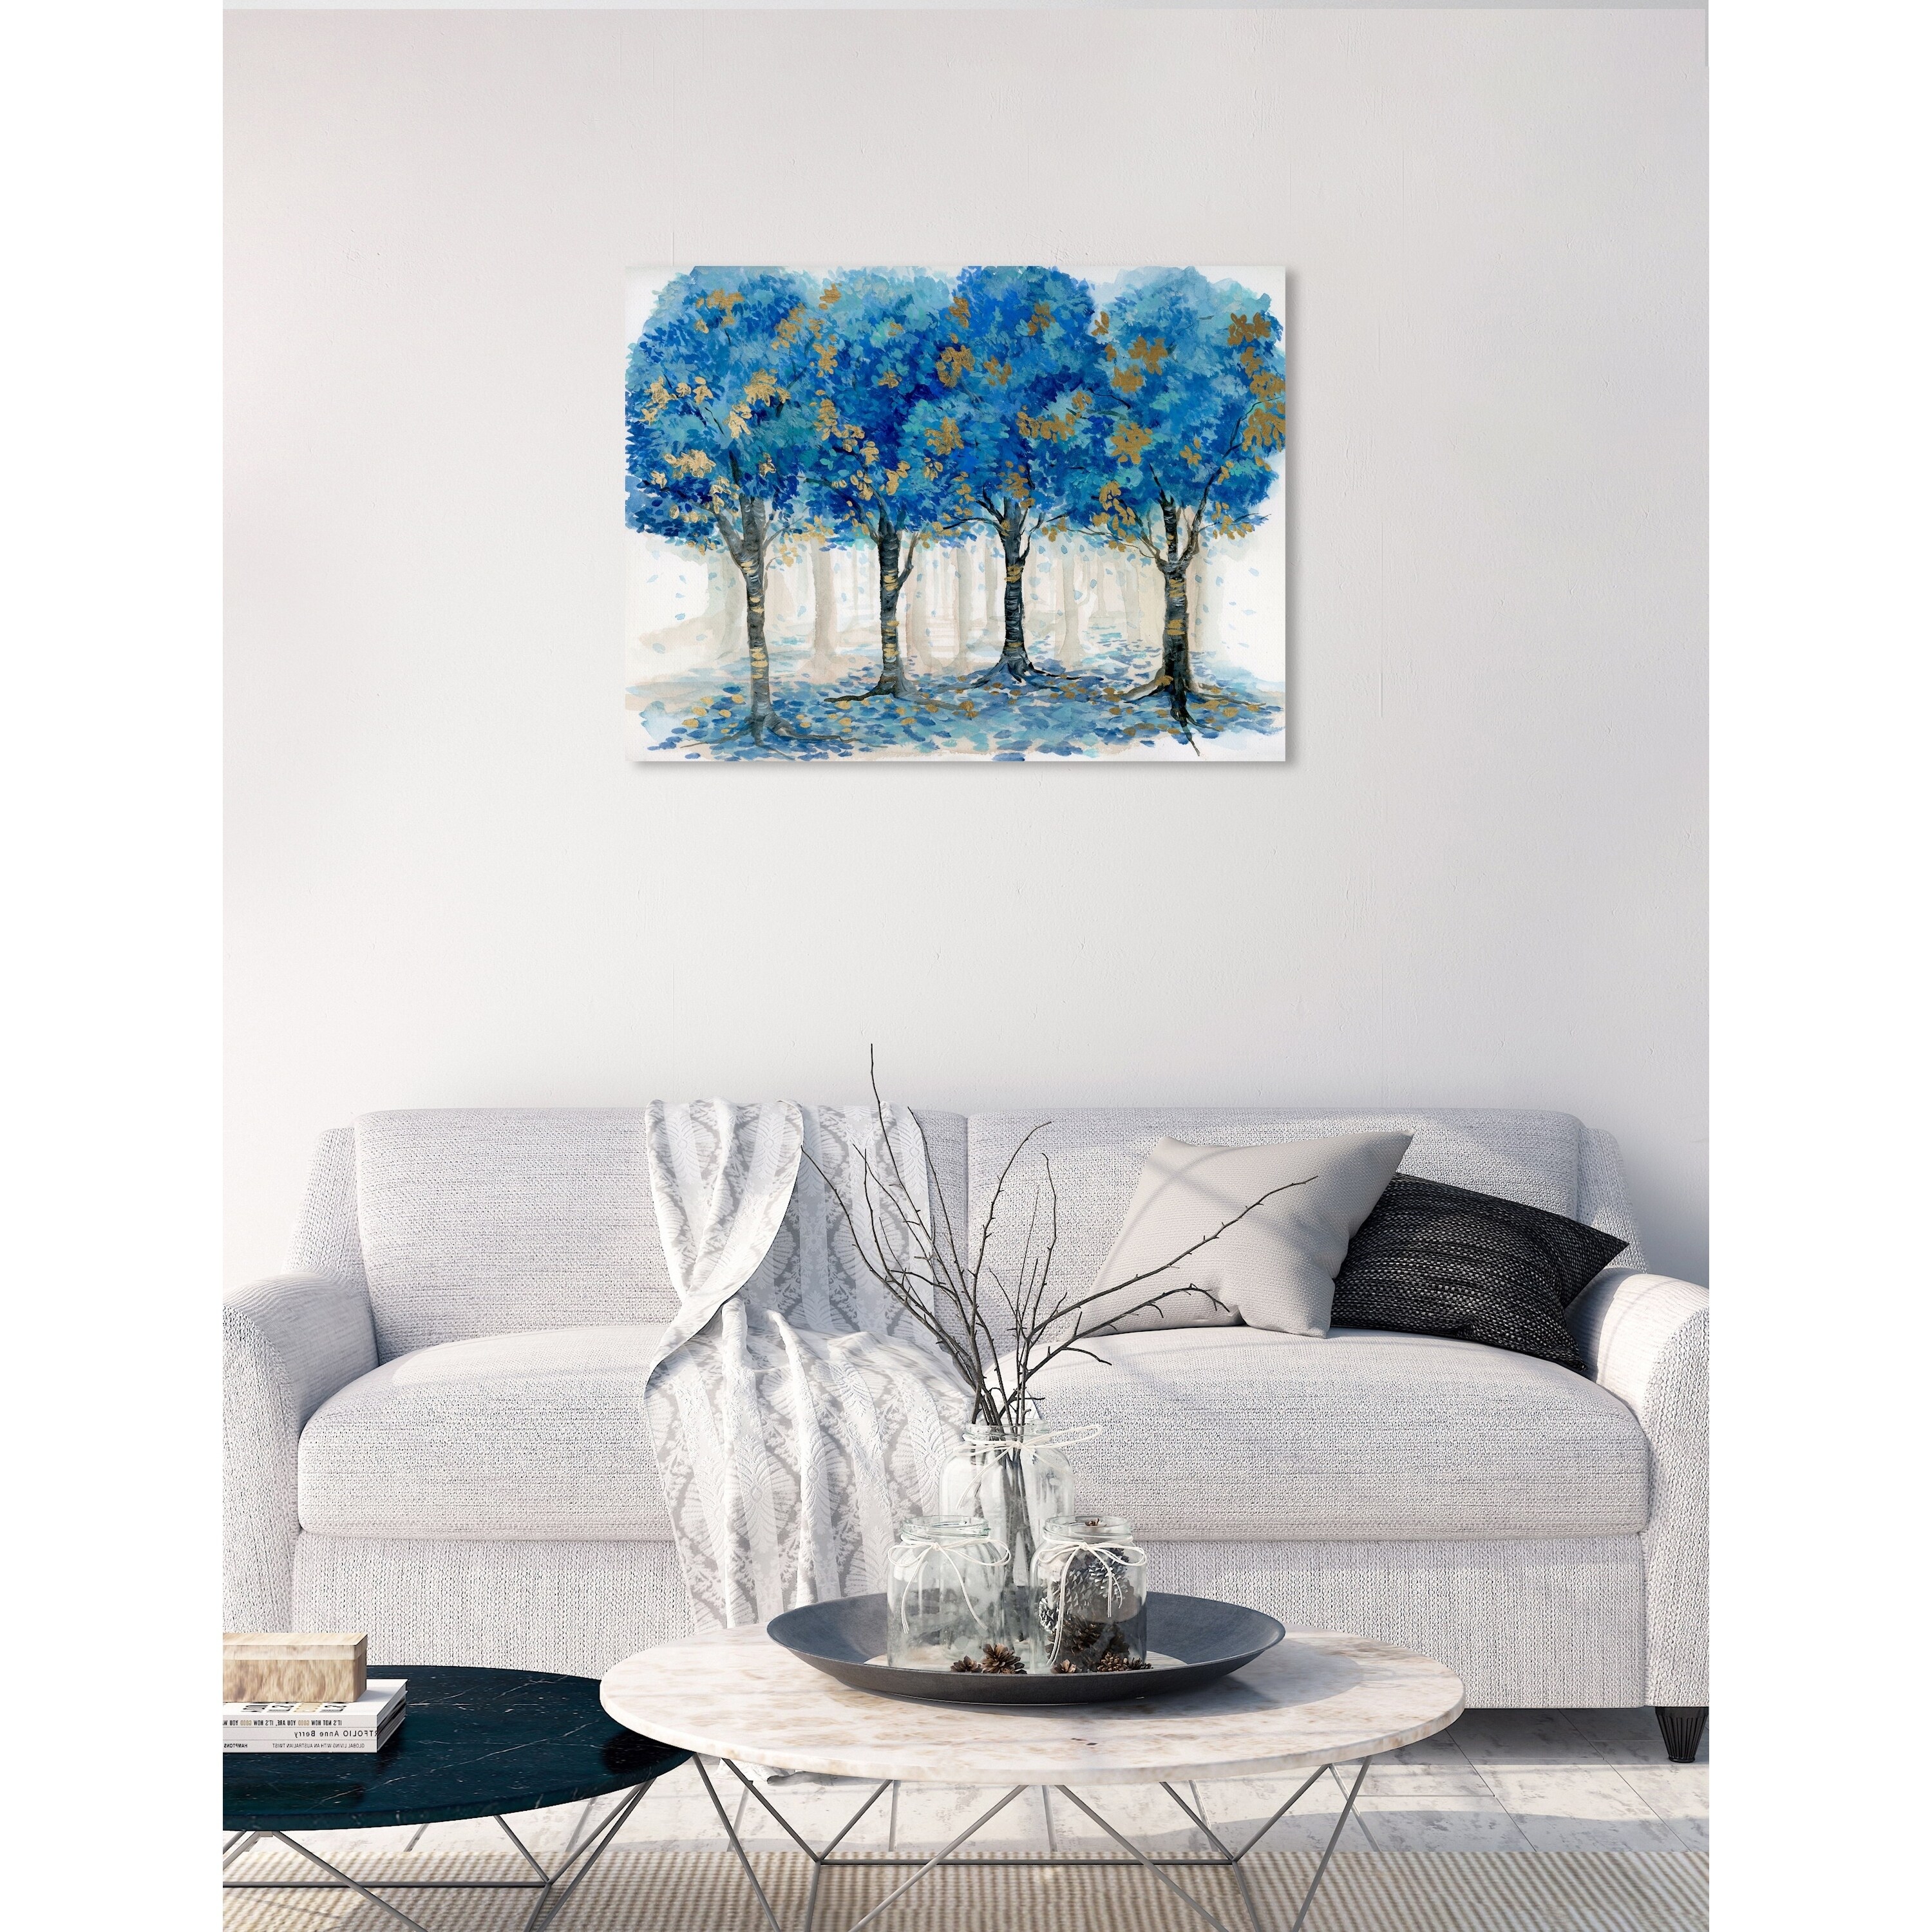 Shop Oliver Gal Royal Blue Forest Floral And Botanical Wall Art Canvas Print Blue Gold Overstock 26031482 24 X 18